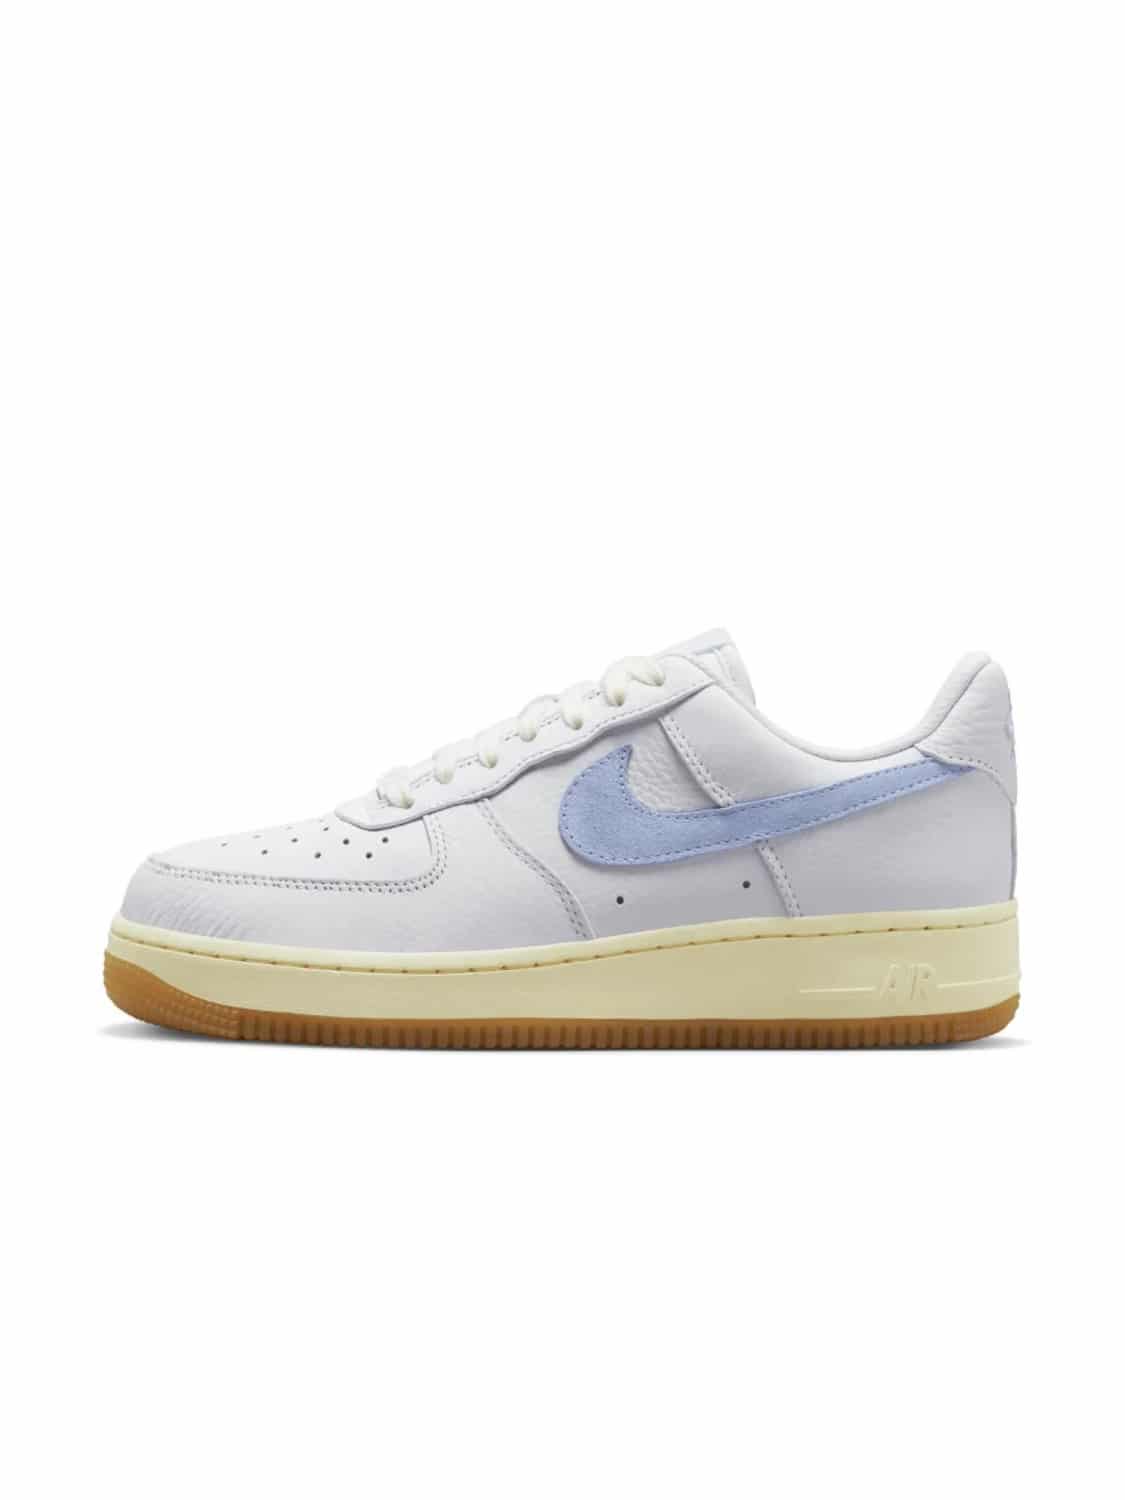 Nike Air Force 1 Low '07 WMS